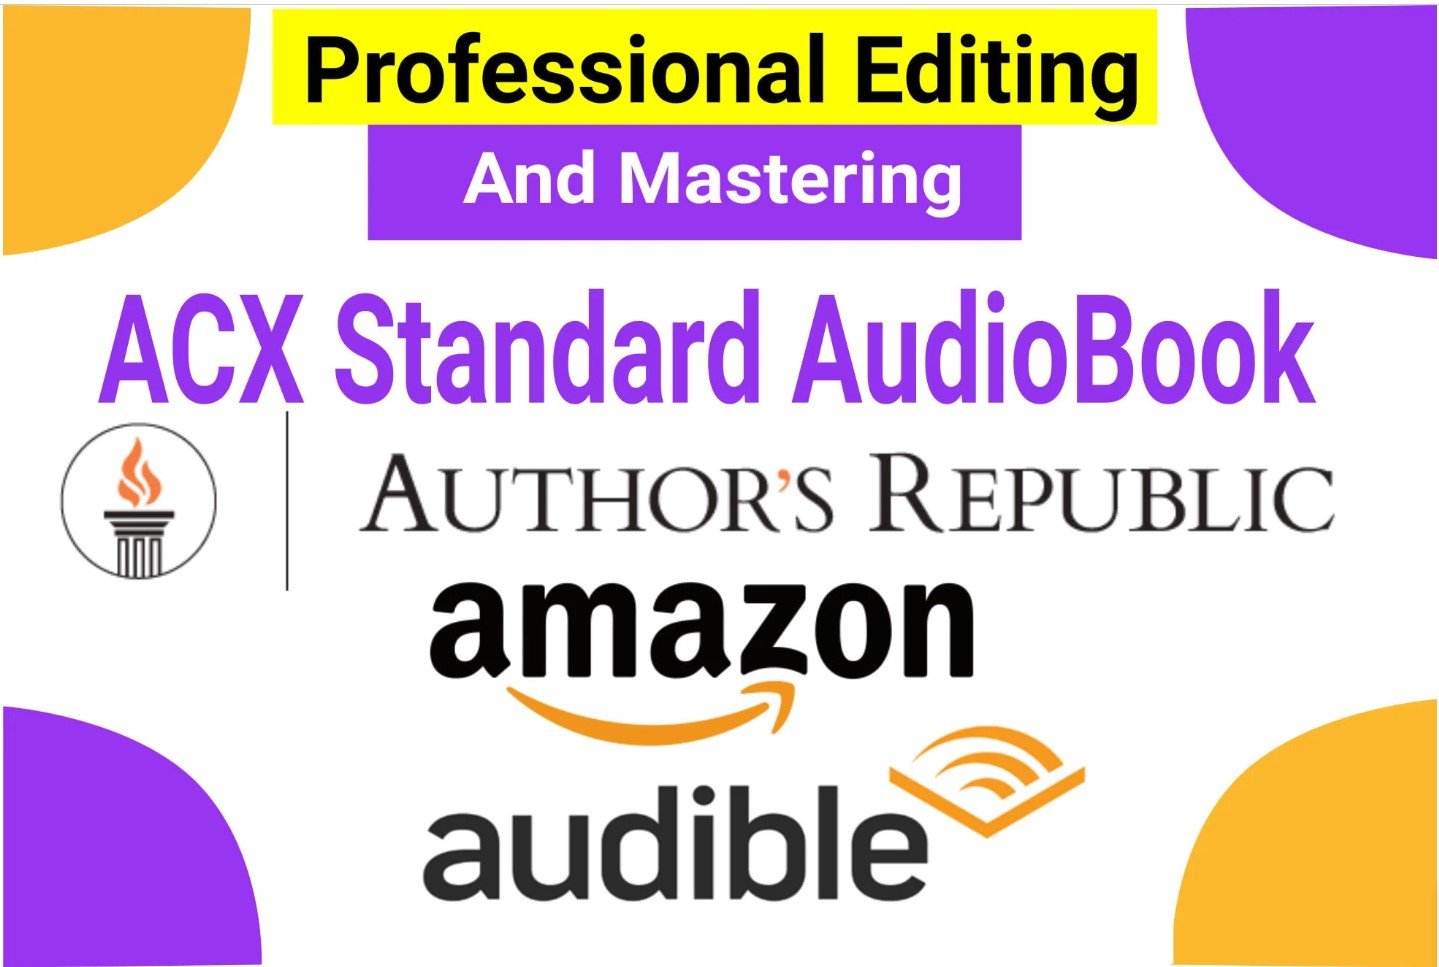 I will narrate and produce your audiobook to audible standards